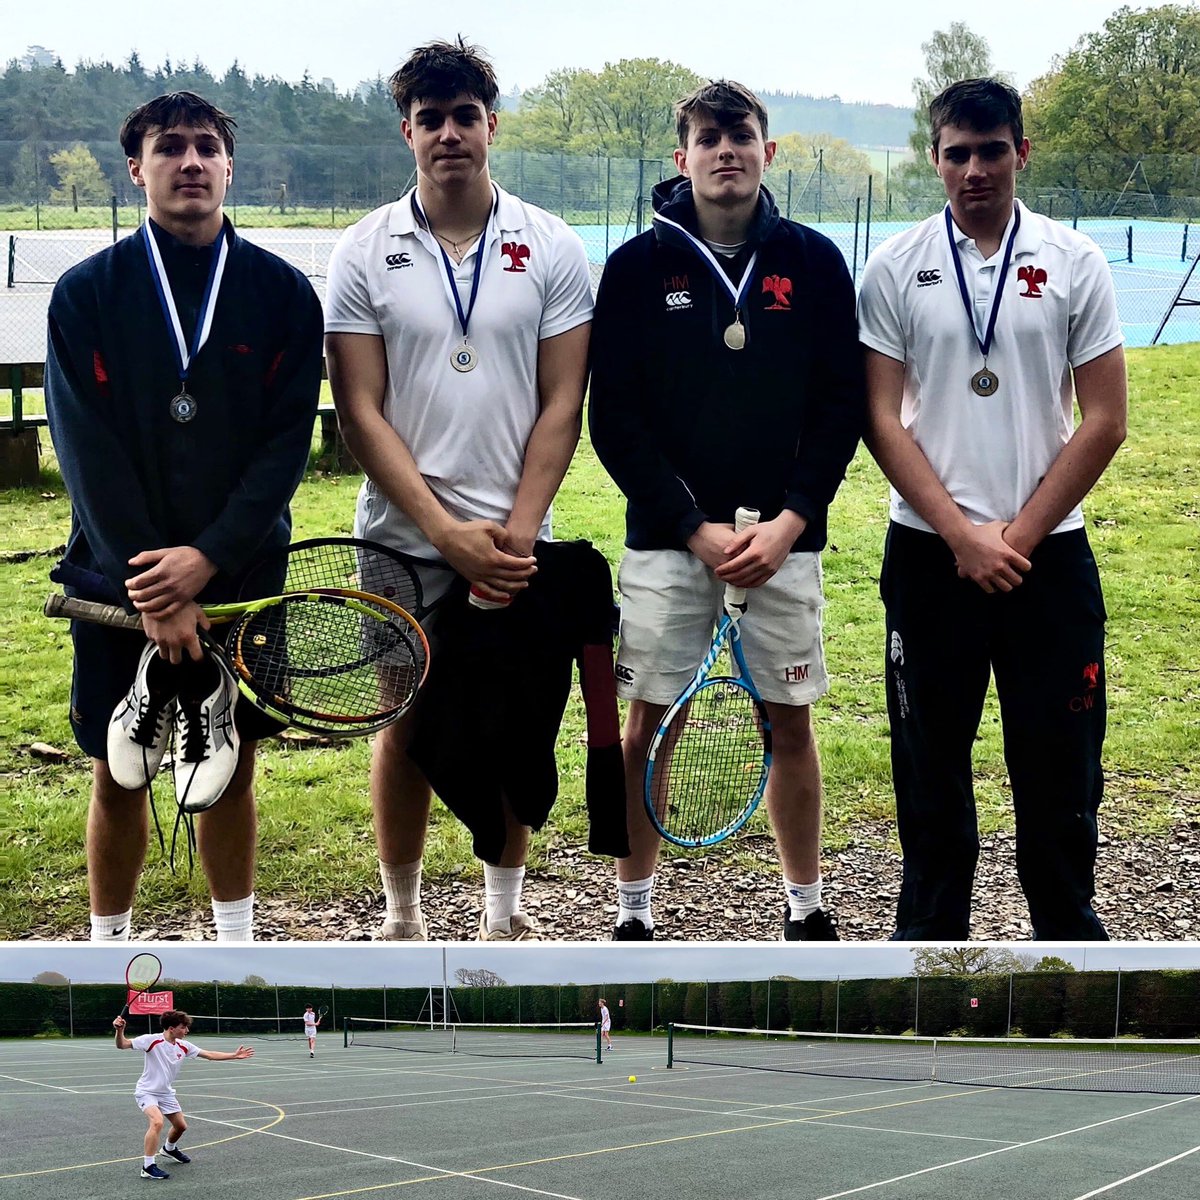 Hurst U18 boys came home with some silverware from the Sussex League competition yesterday. Thanks to @Worth_Sports for hosting

🎾  🦅  🎾 

#WeAreHurst #HurstSport